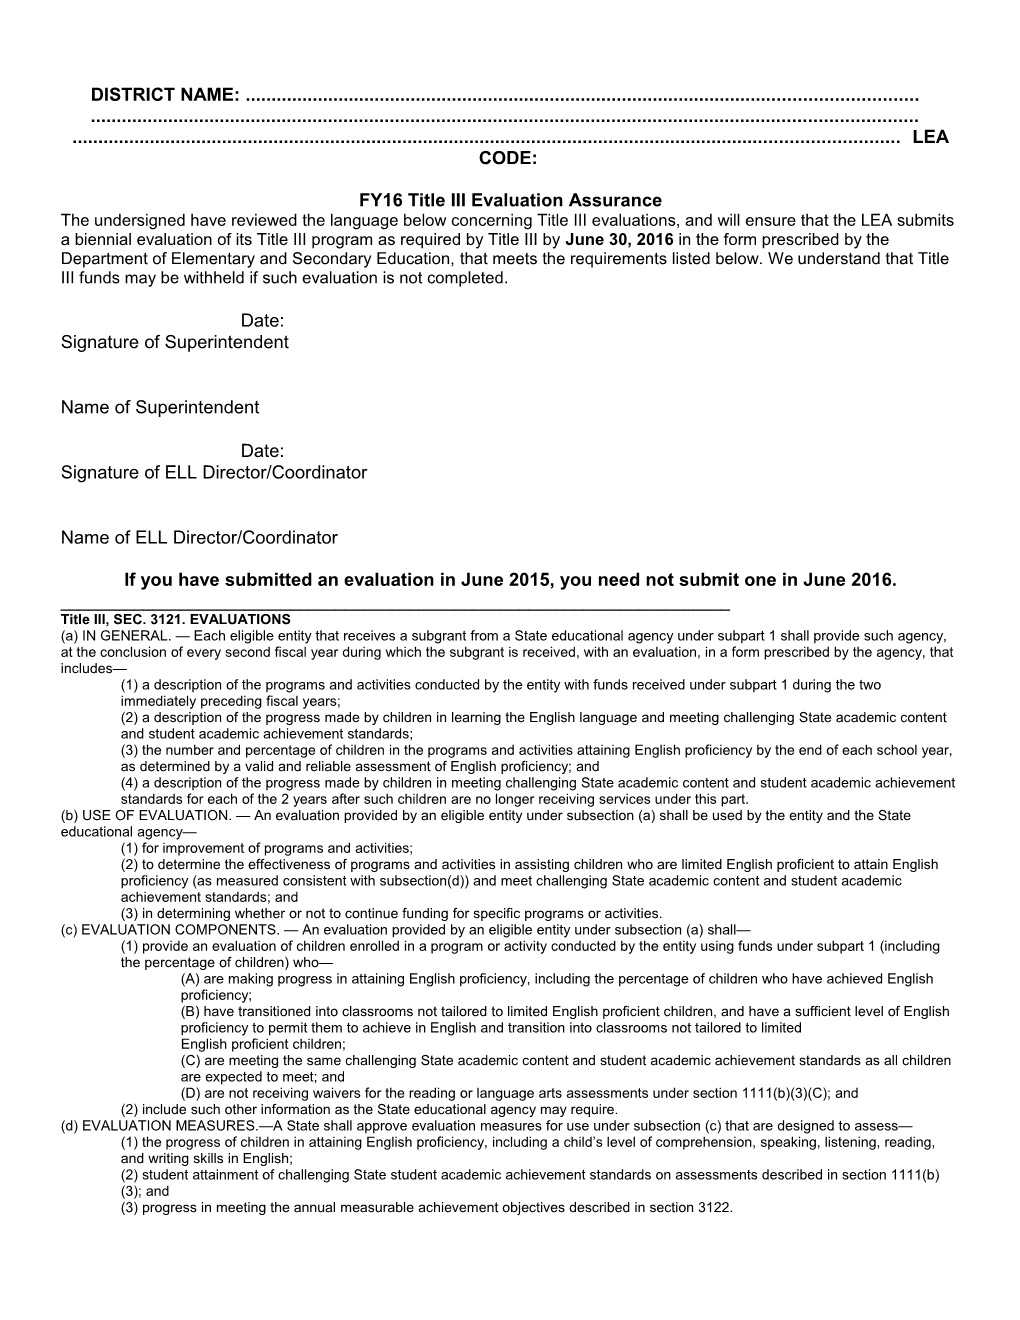 FY2016 Fund Code 180-186 Title III: English Language Acquisition and Academic Achievement